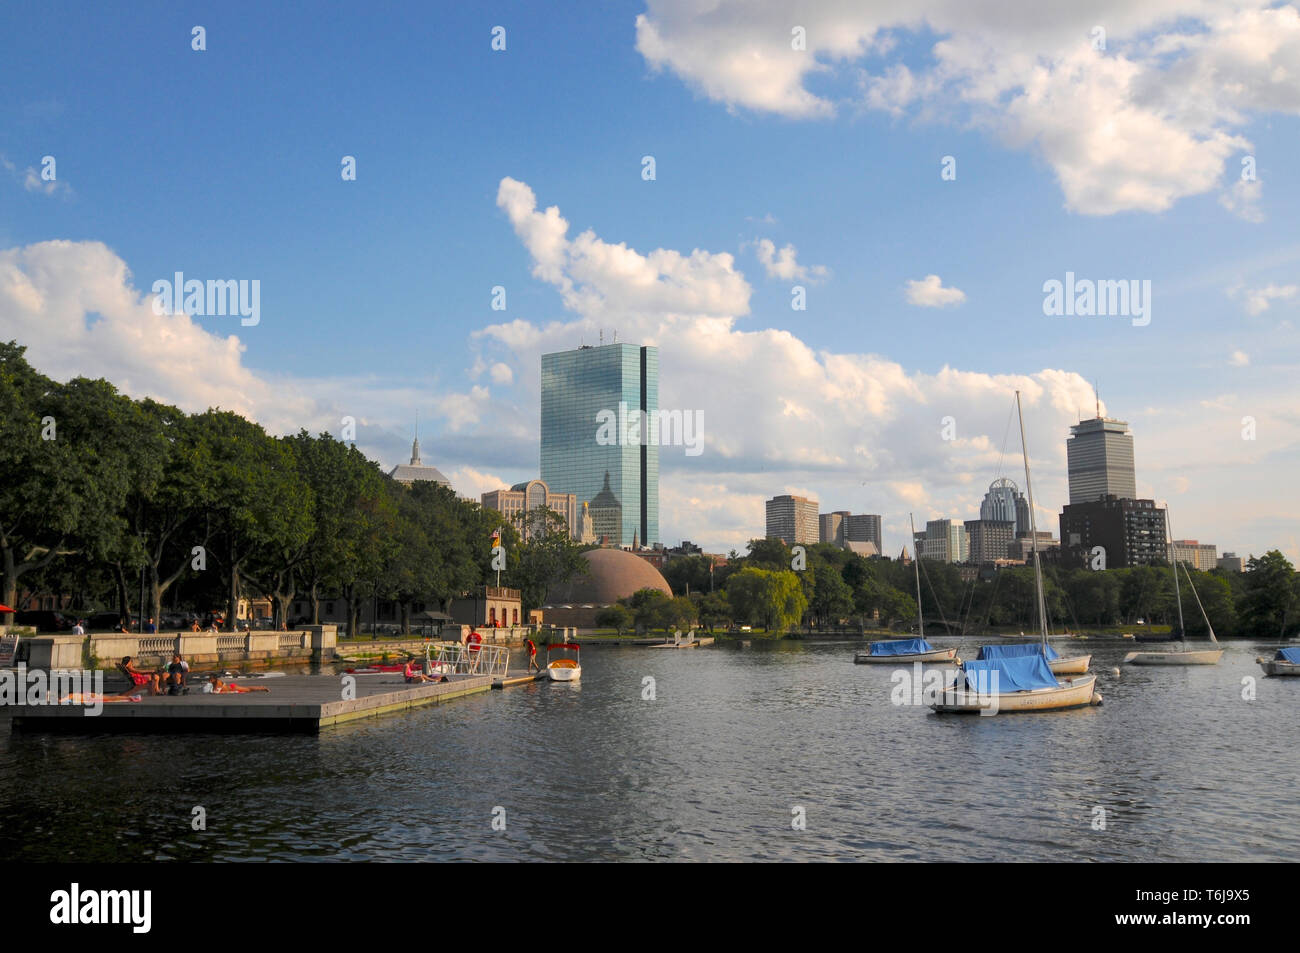 Boston, Massachusetts, USA - 18th July 2014 : Beautiful view of John Hancock Tower and the Charles river on a sunny day Stock Photo